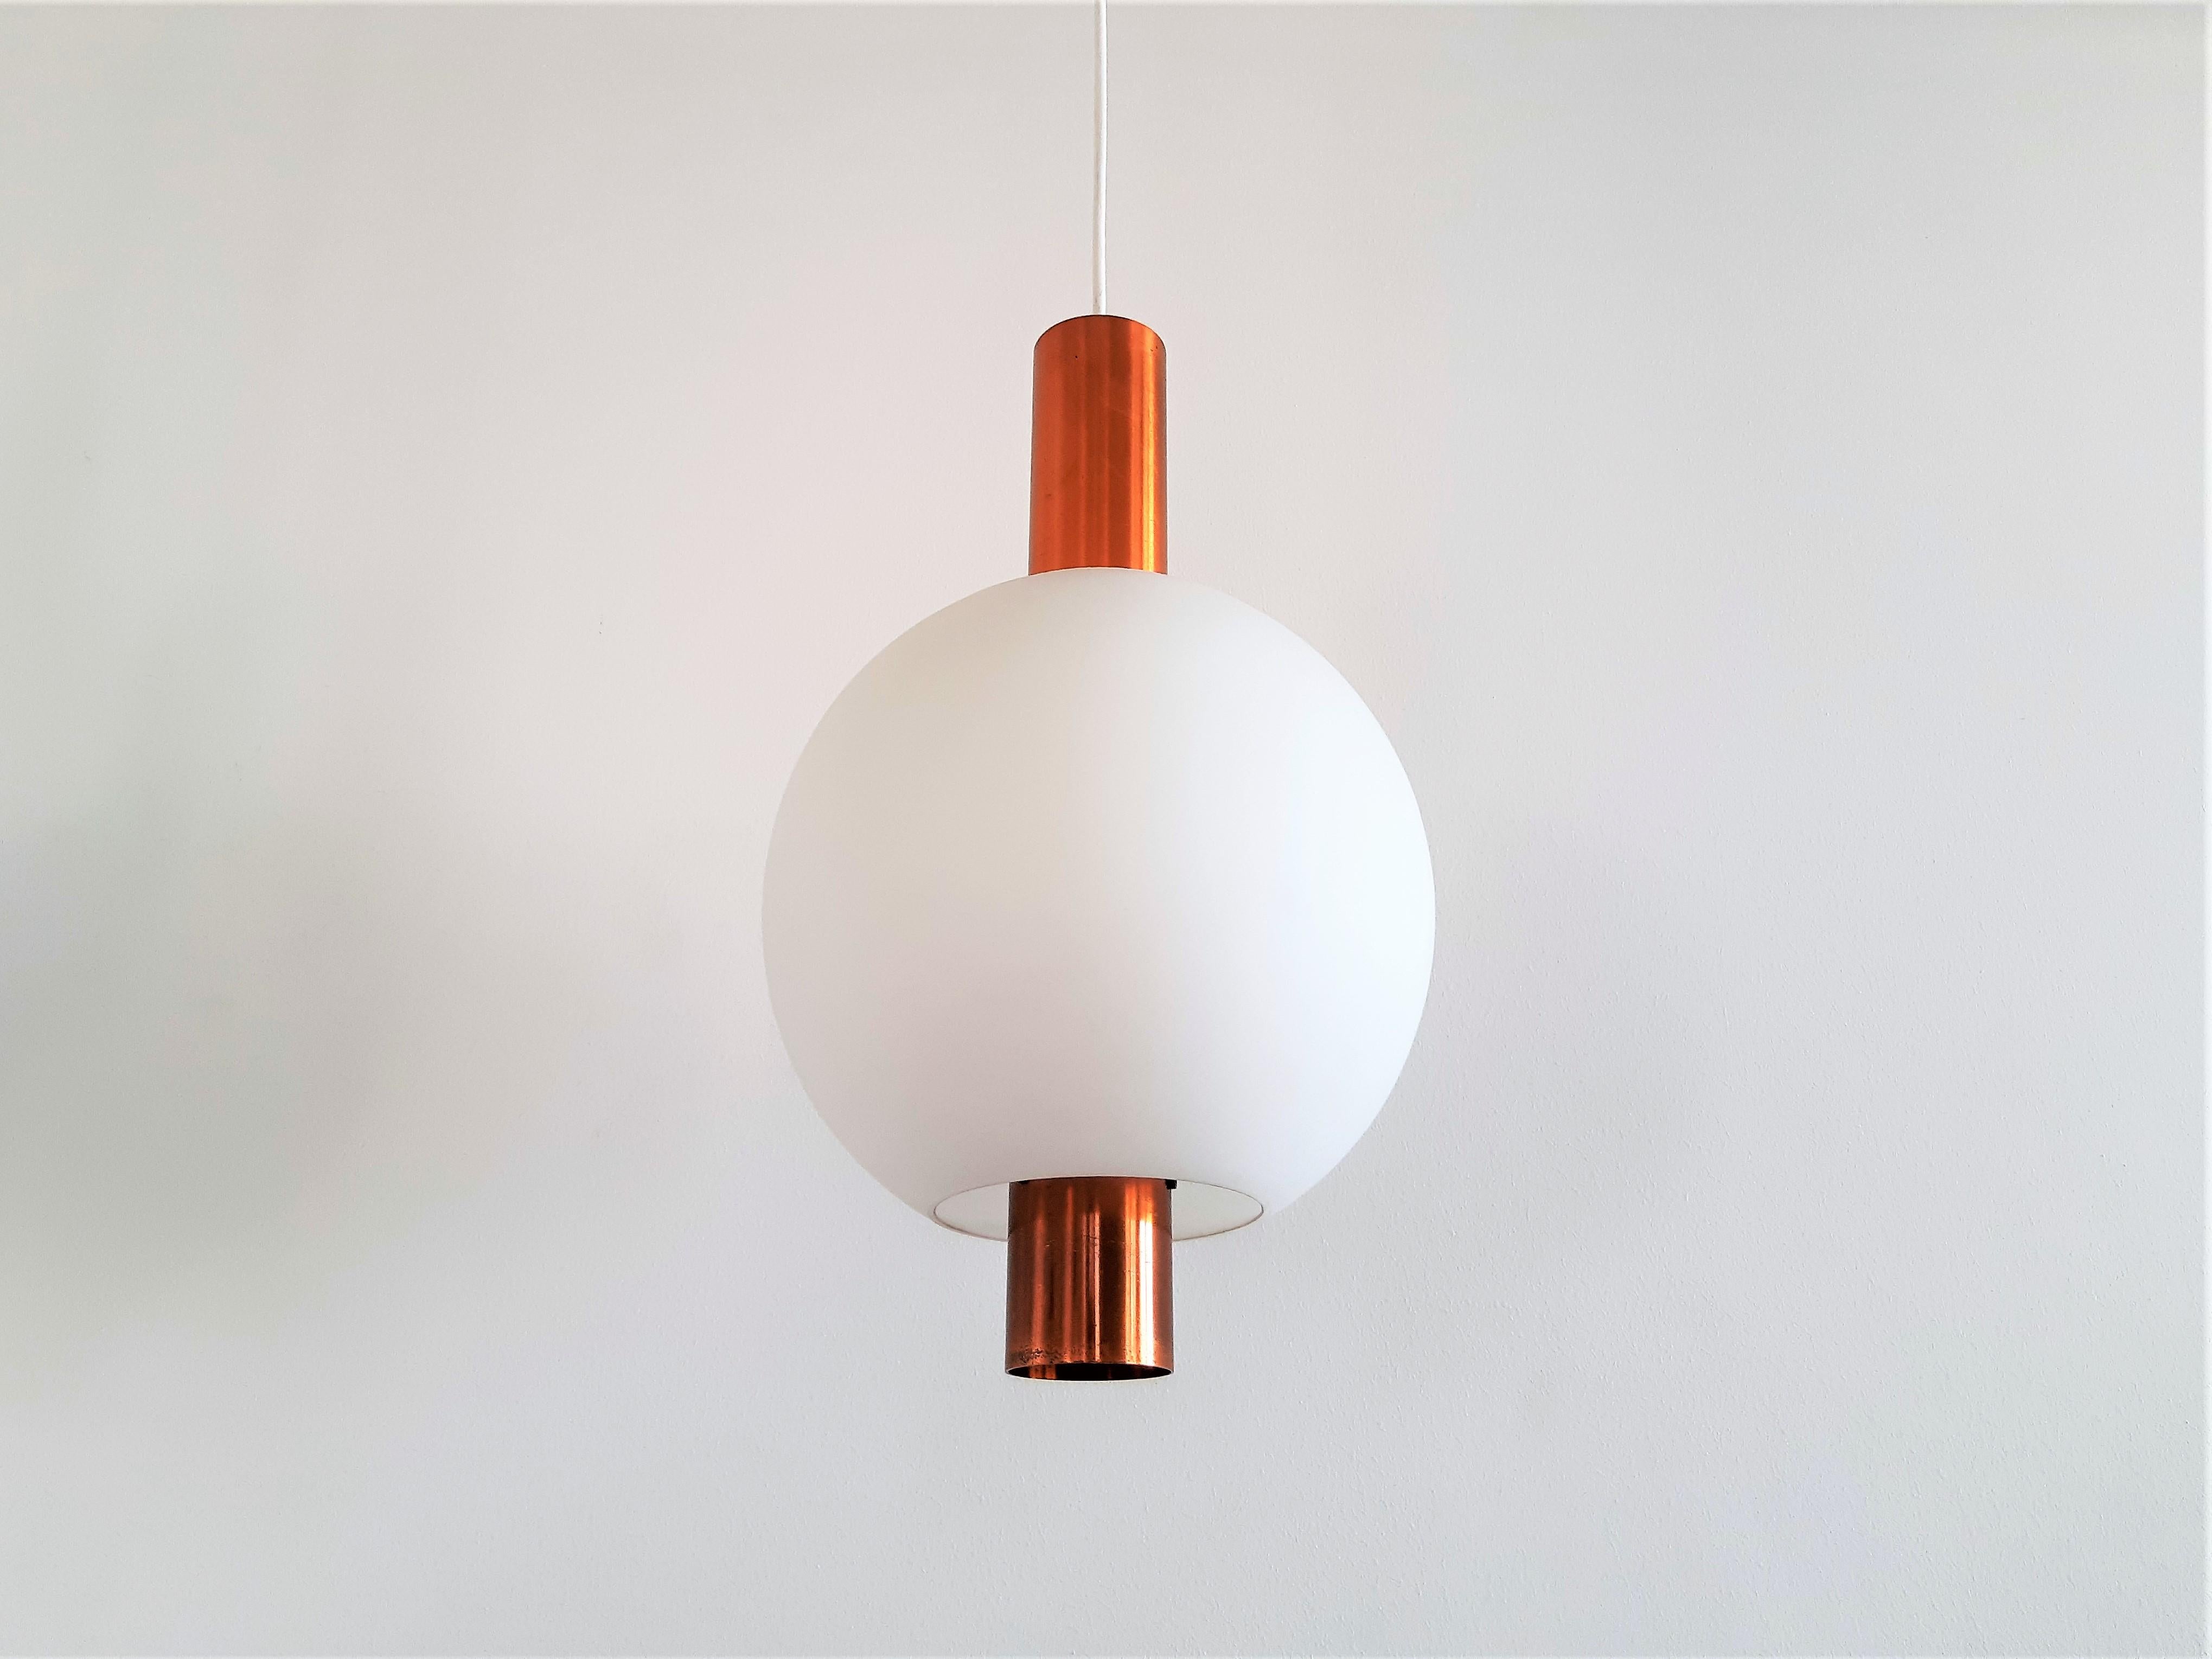 Mid-Century Modern Set of 2 Copper and Glass Pendant Lamps for Hiemsrta Evolux, 1960's For Sale